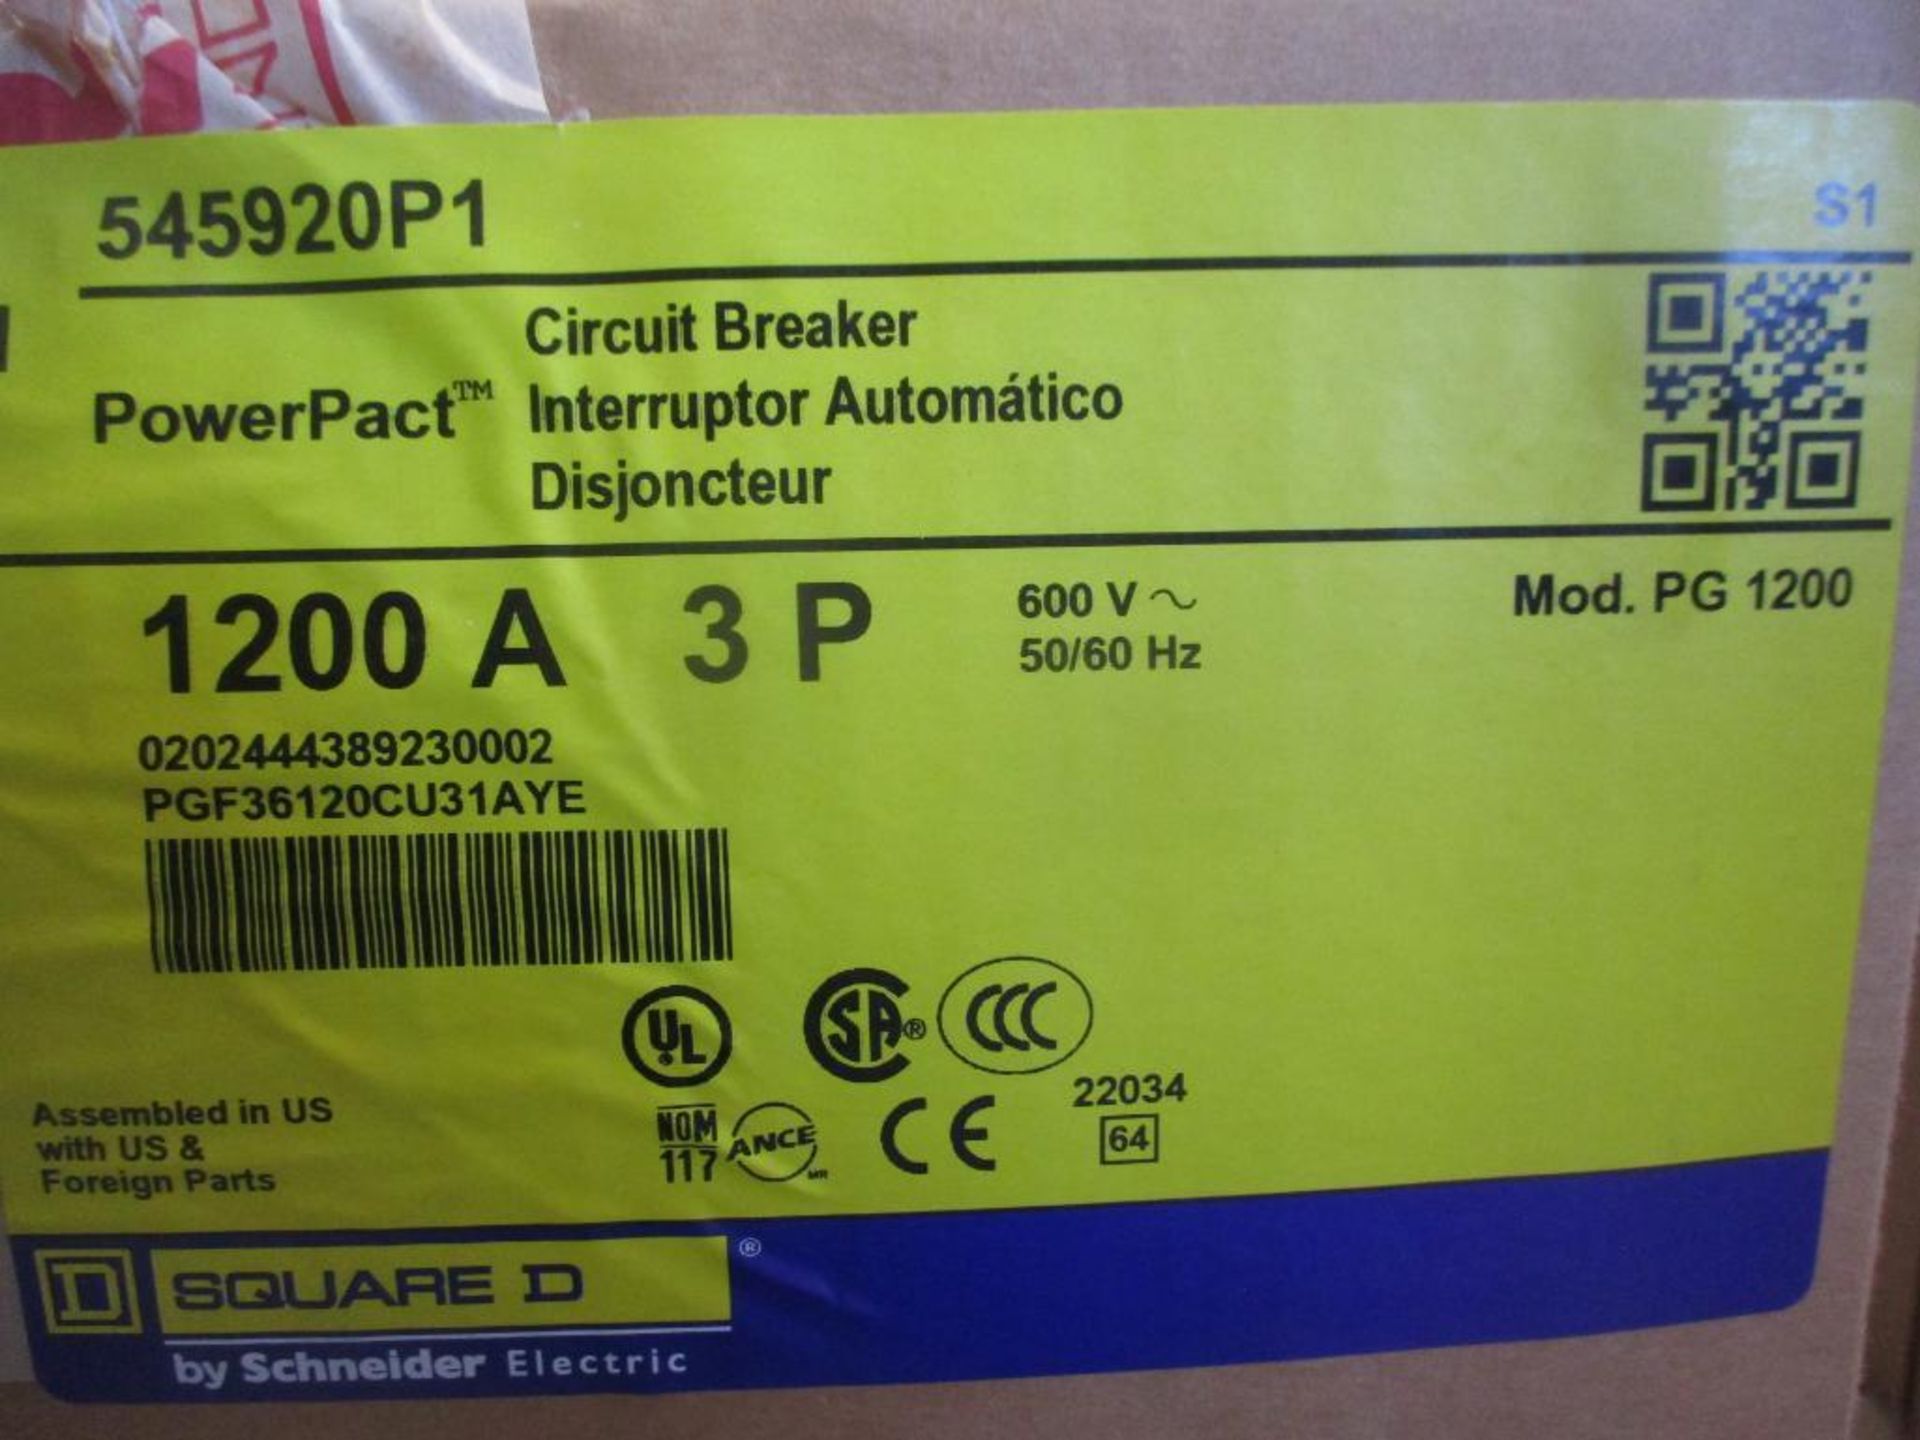 Square D 1200 AMP Circuit Breaker, 545920P1, 1200A, 3P, 600VAC, PG1200 (New in Box) - Image 4 of 4